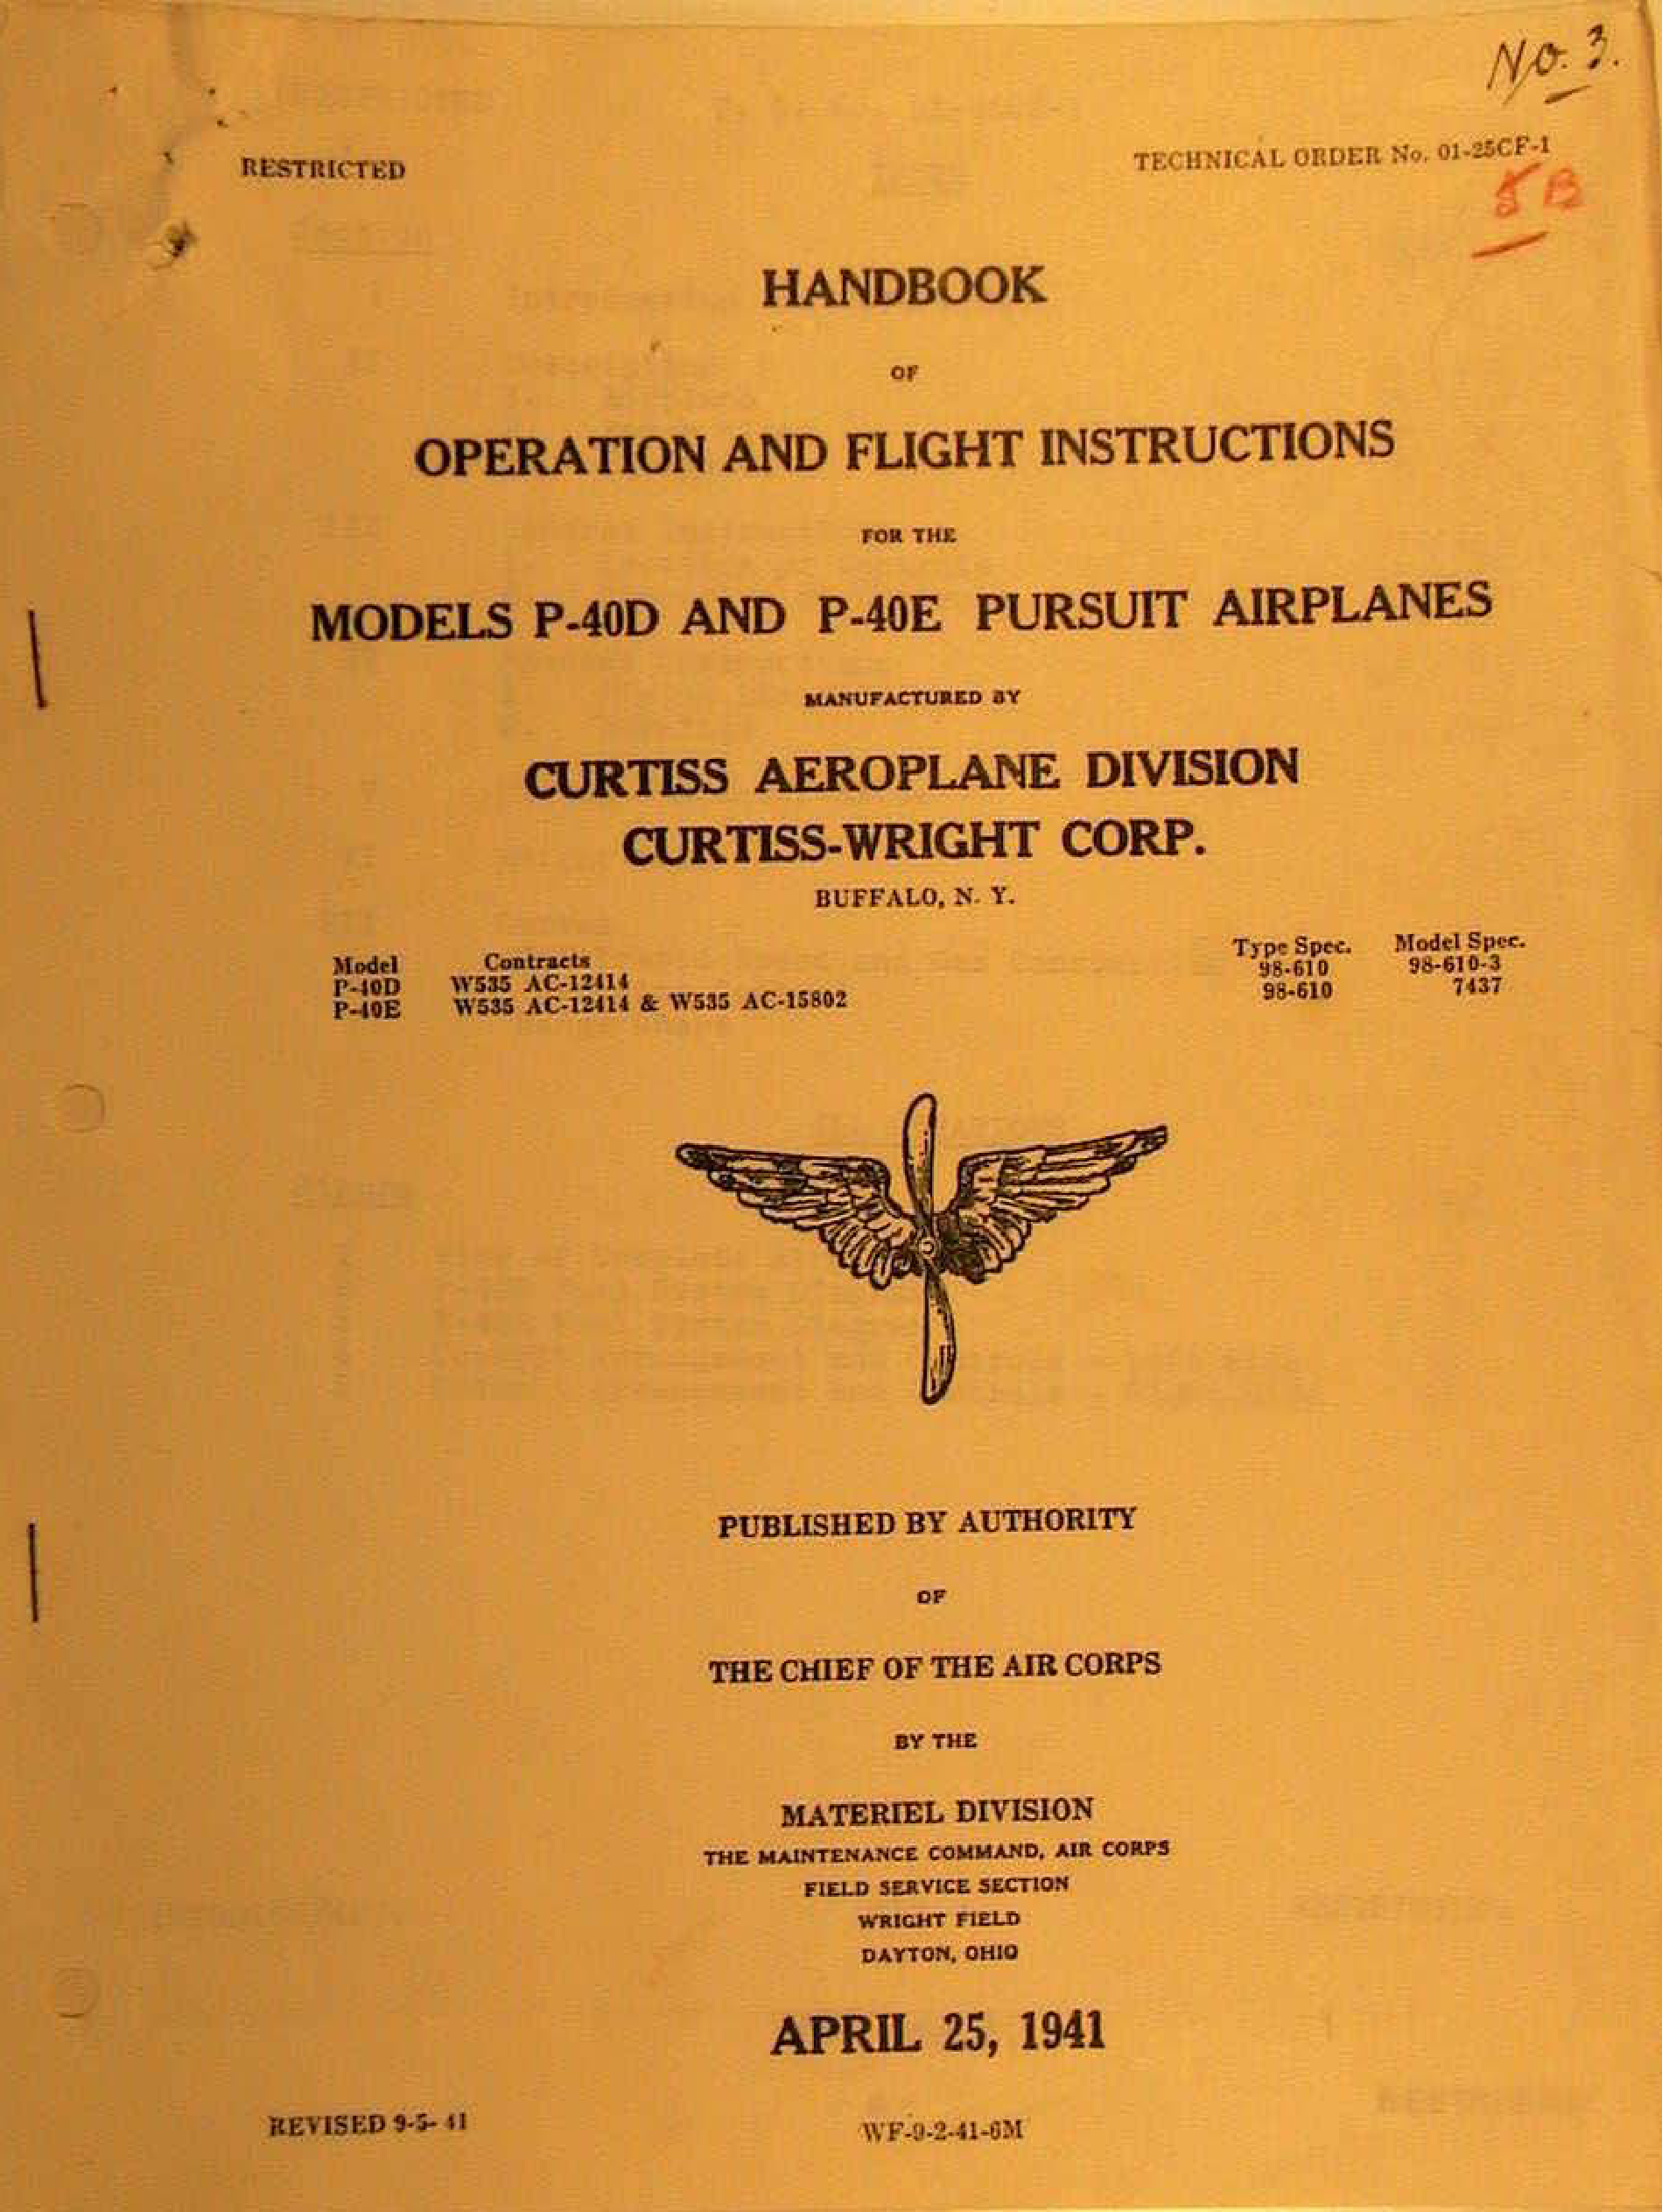 Sample page 1 from AirCorps Library document: Operation and Flight Instructions for P-40D and P-40E